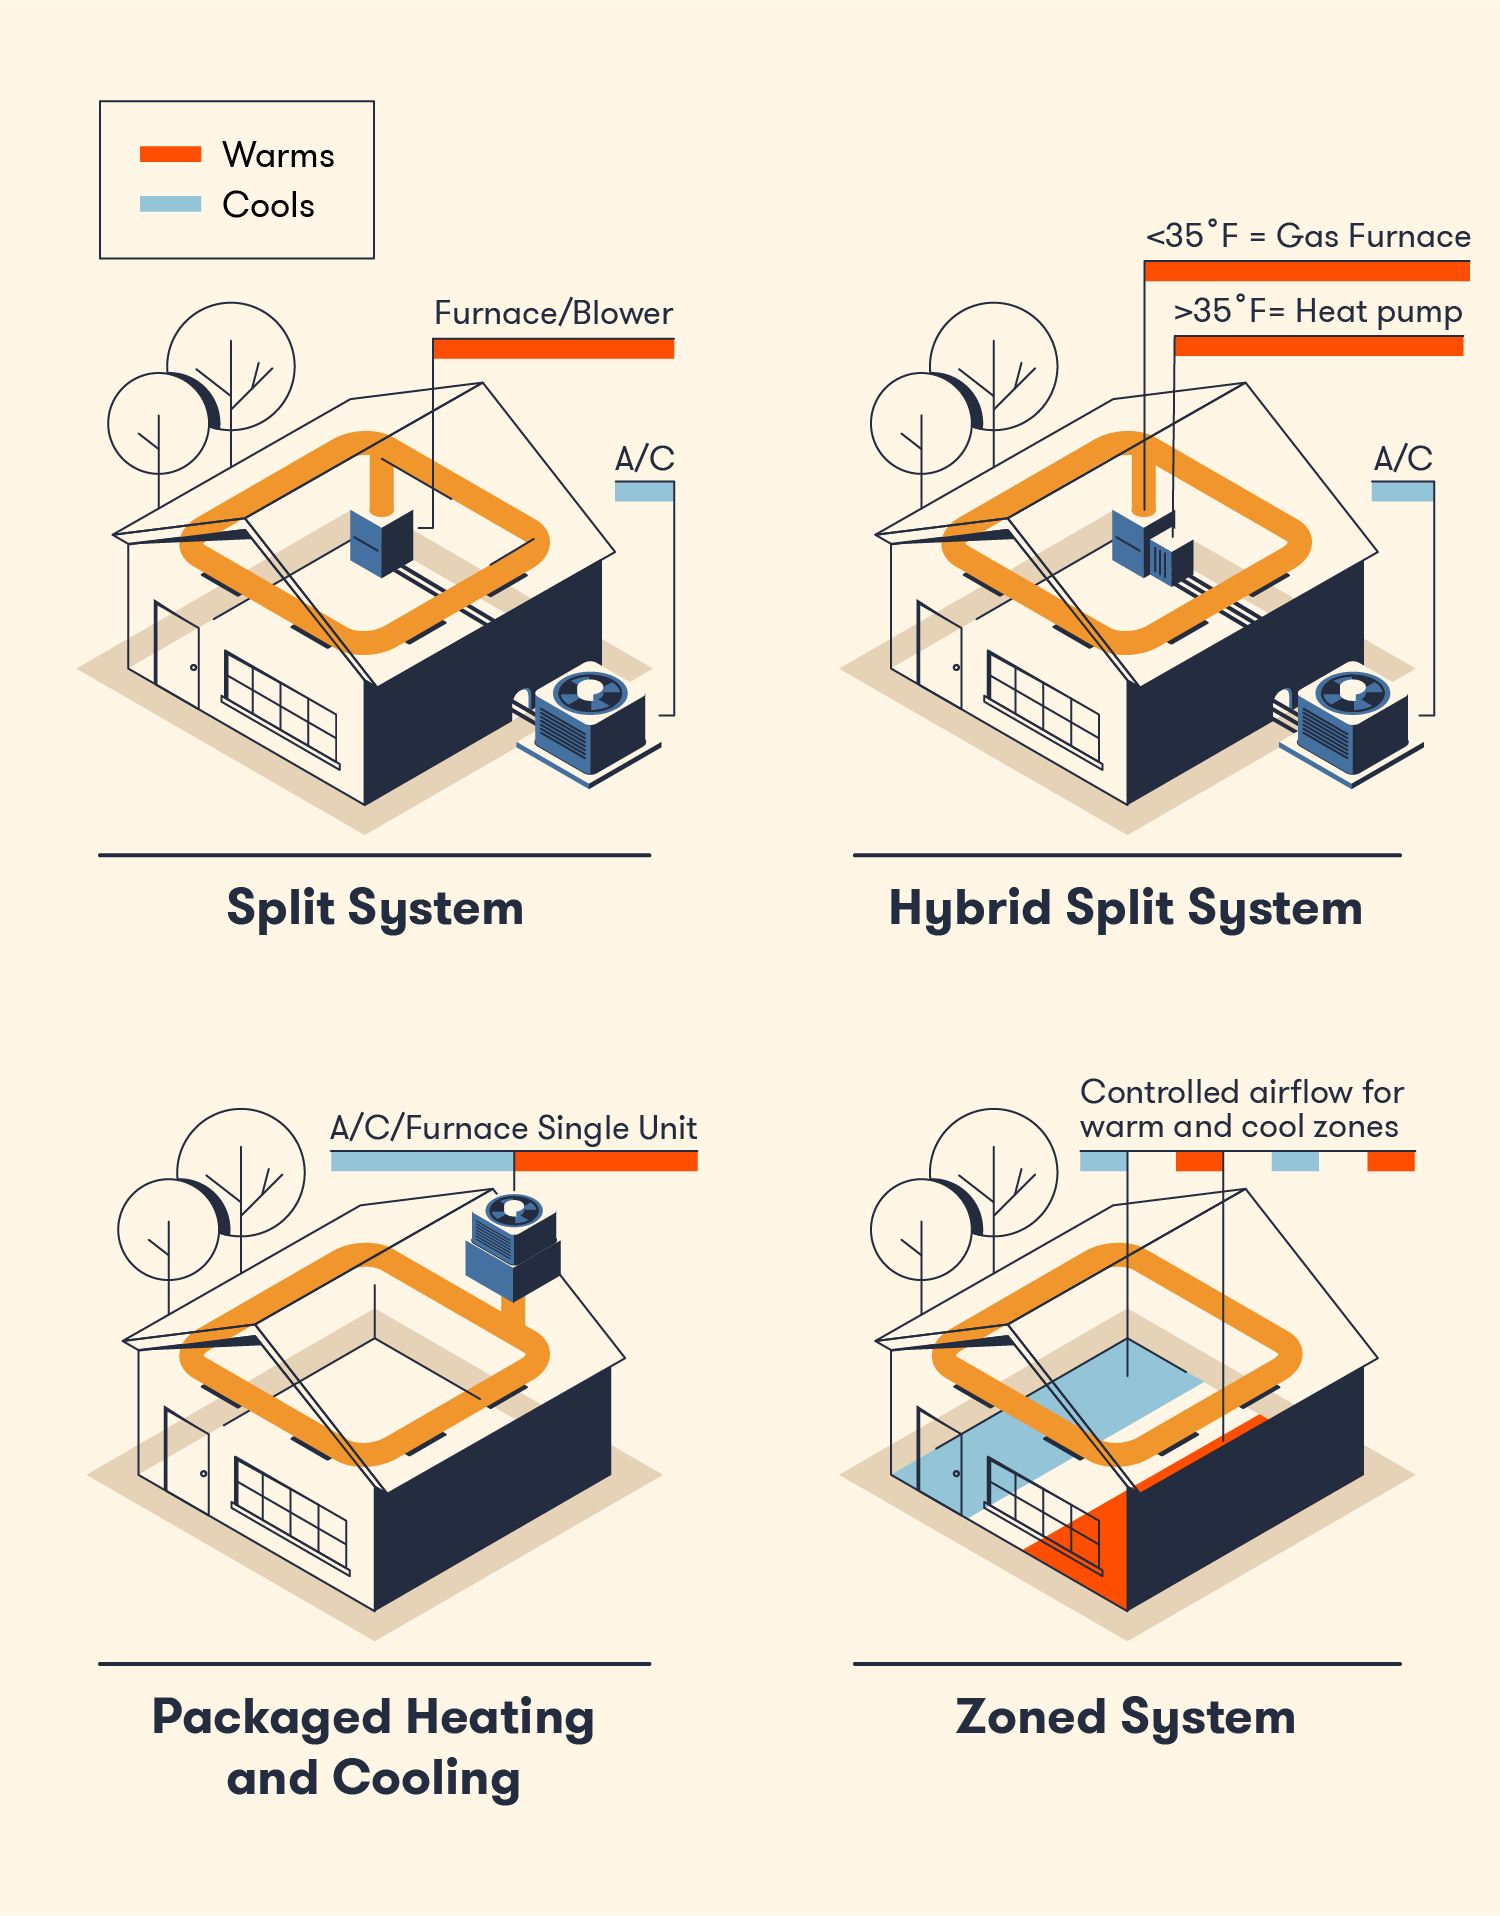 Comparison of Central HVAC Systems and Split Systems